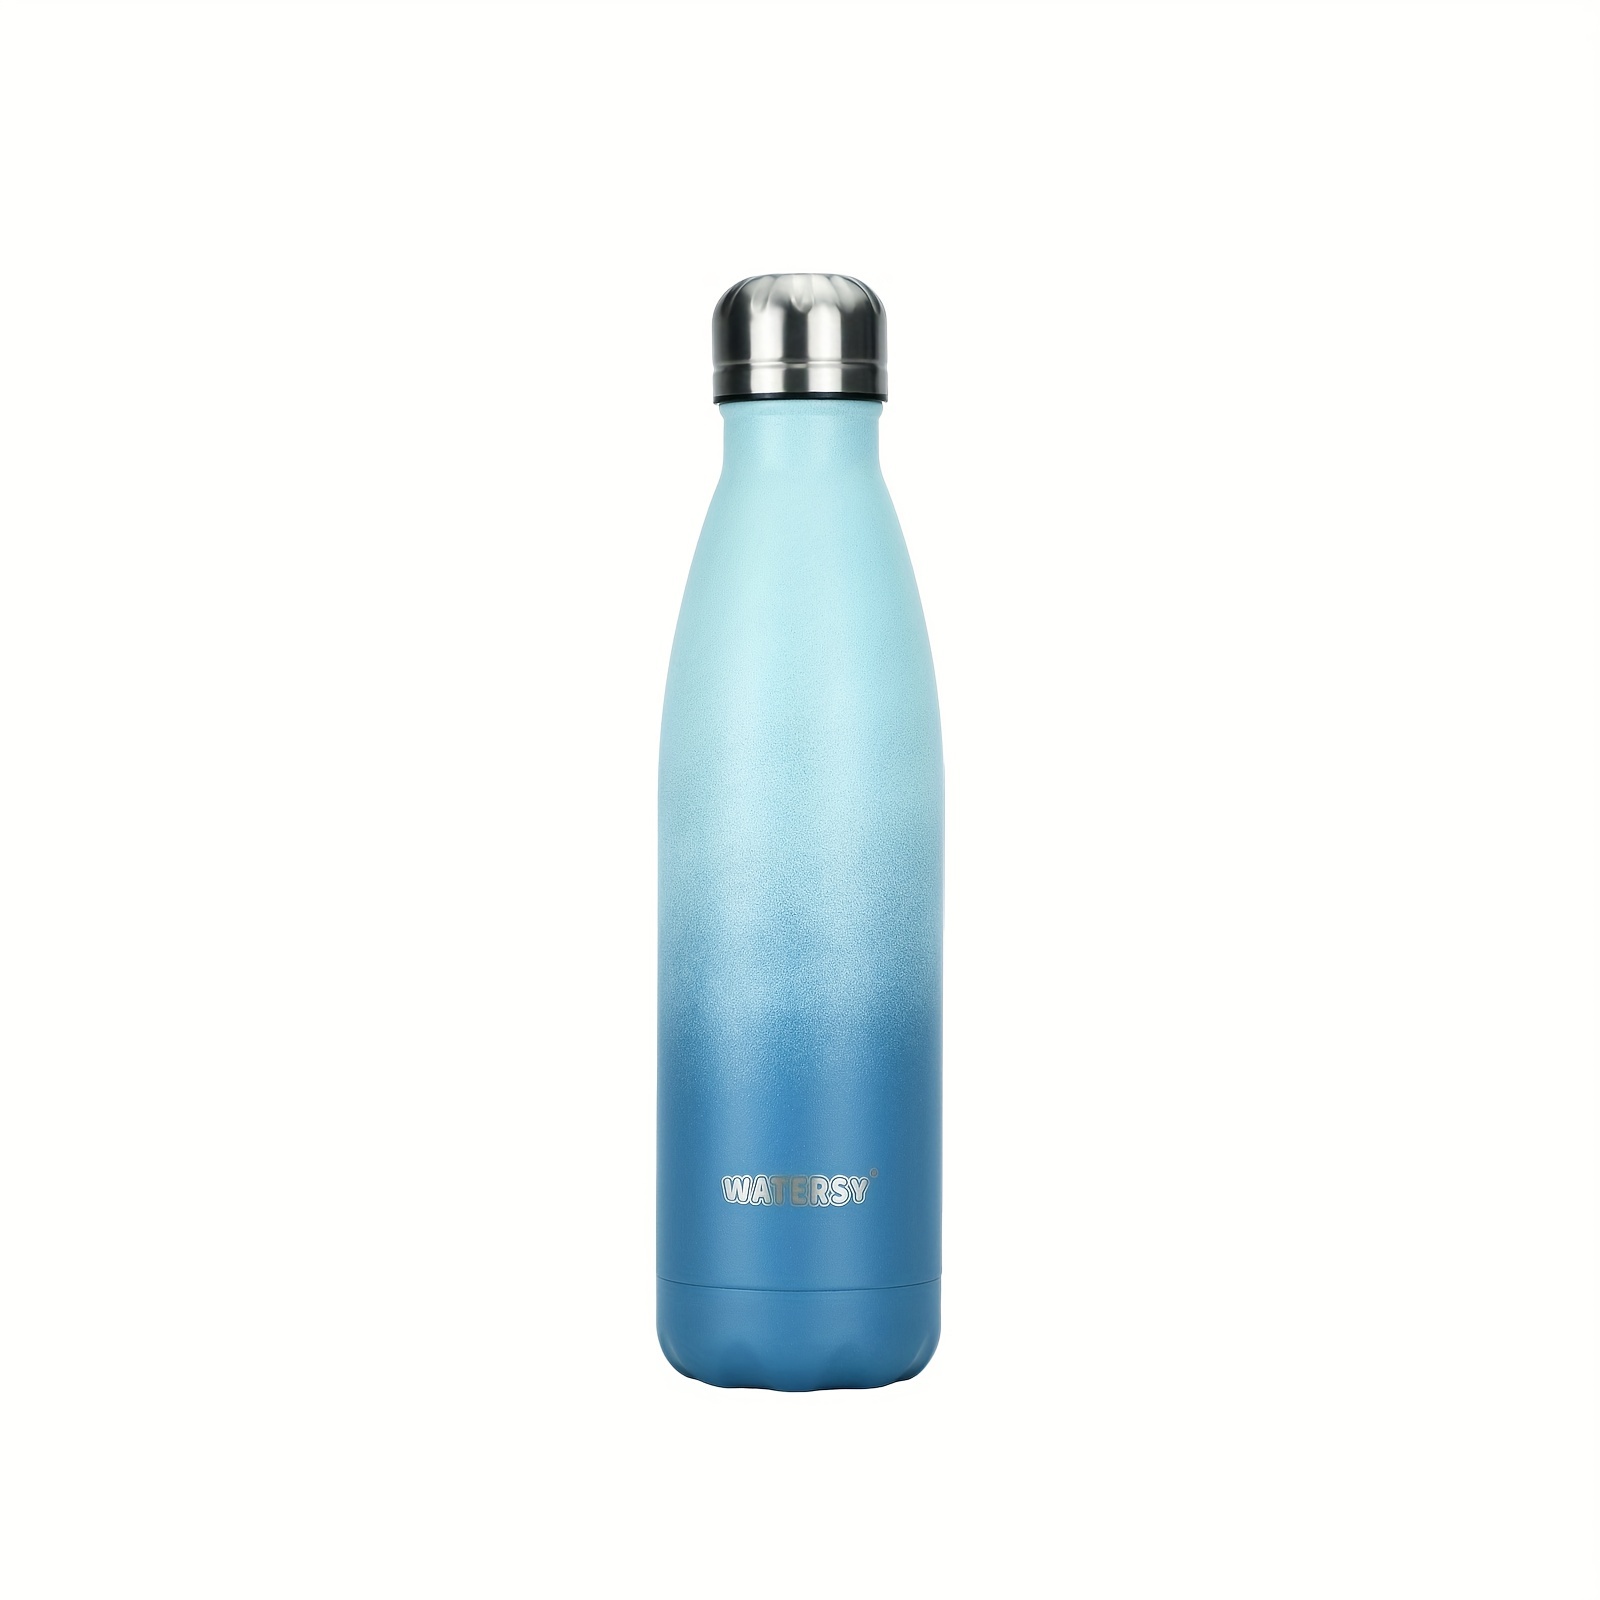 Watersy Insulated Water Bottles -, Stainless Steel Water Bottles